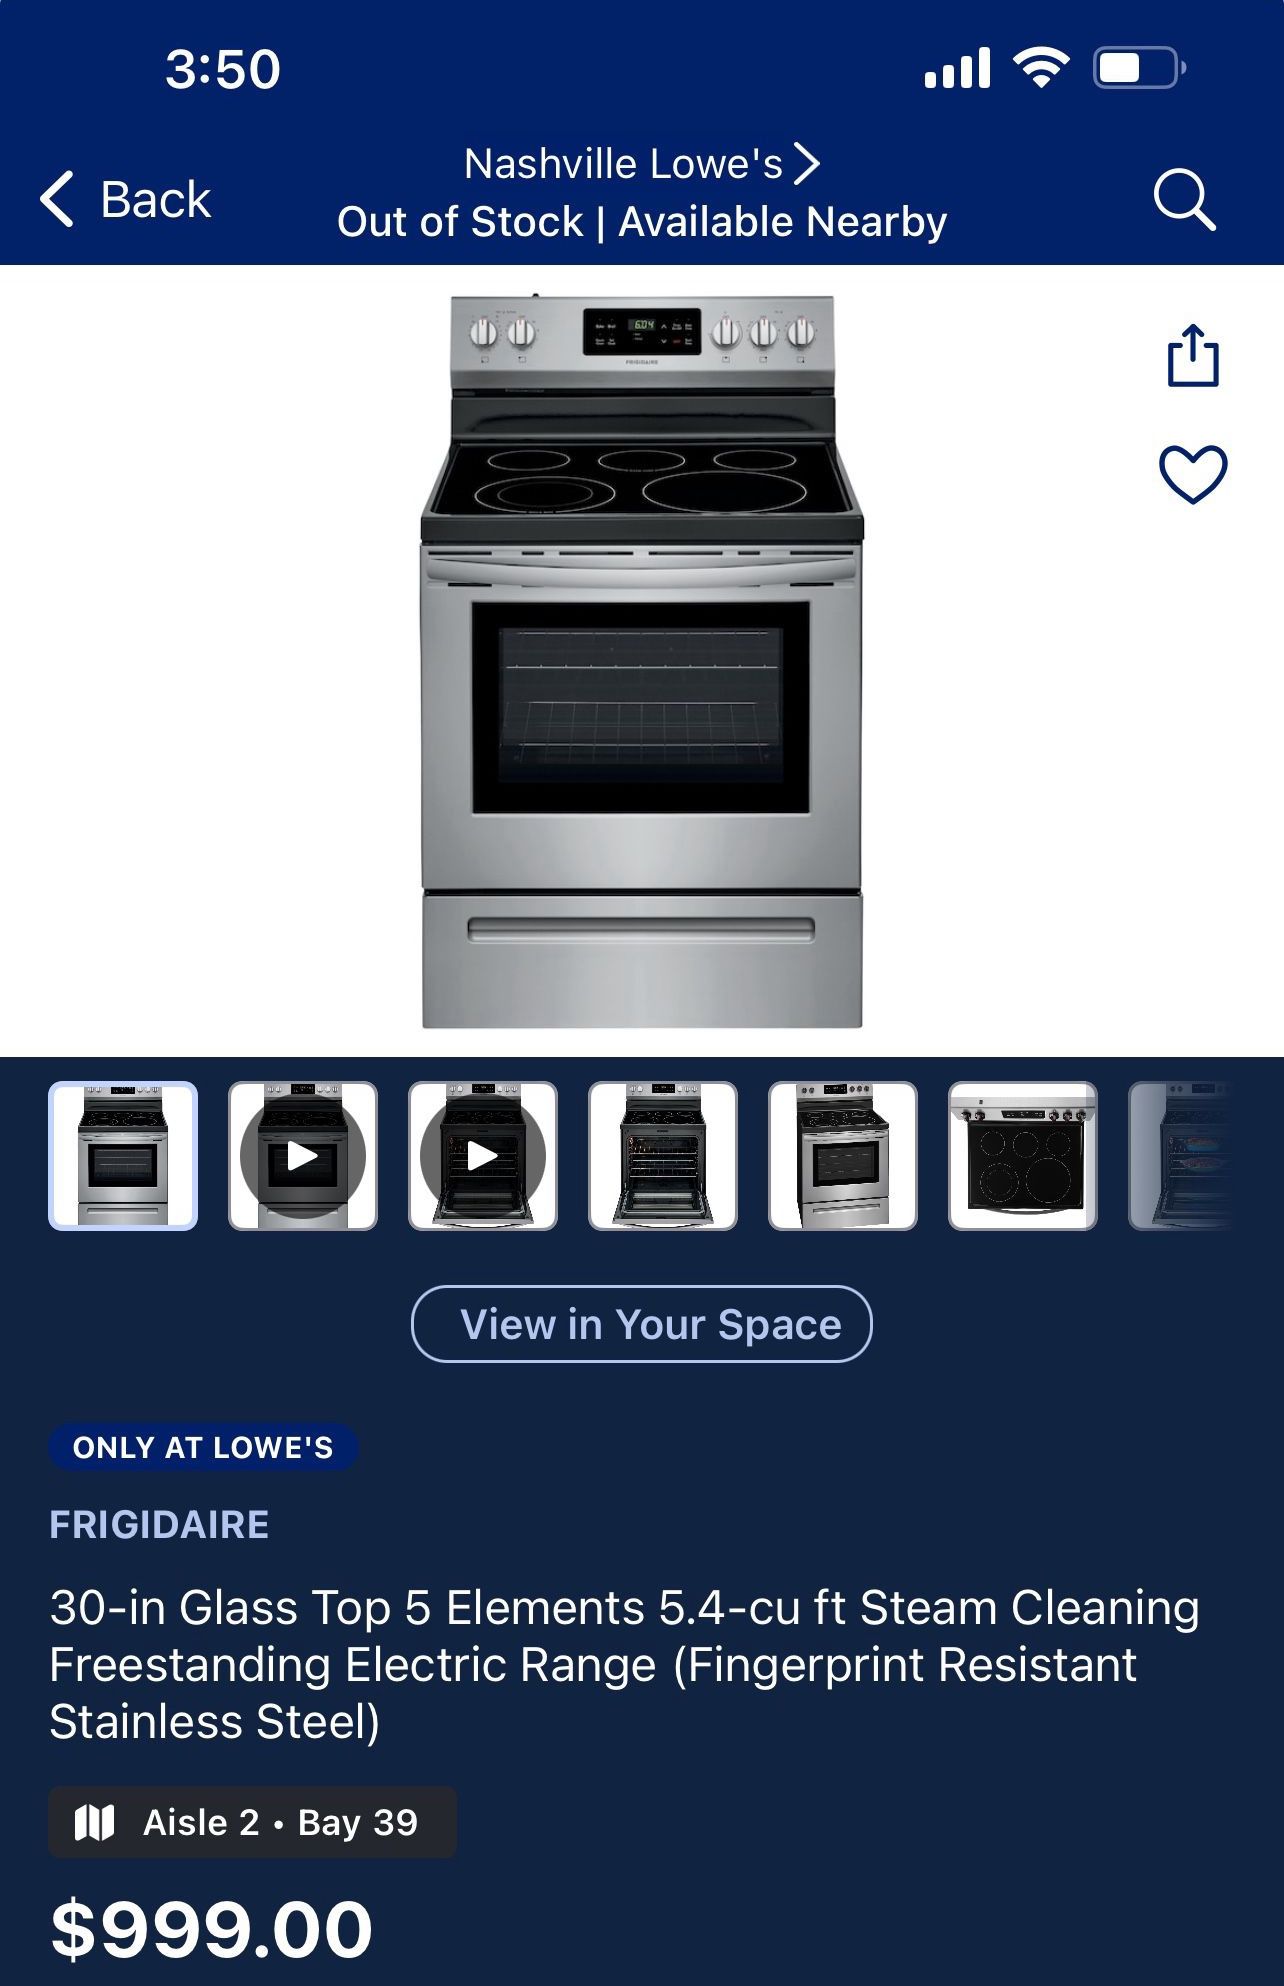 Frigidaire 30-in Glass Top 5 Elements 5.4-cu ft Steam Cleaning Freestanding Electric Range